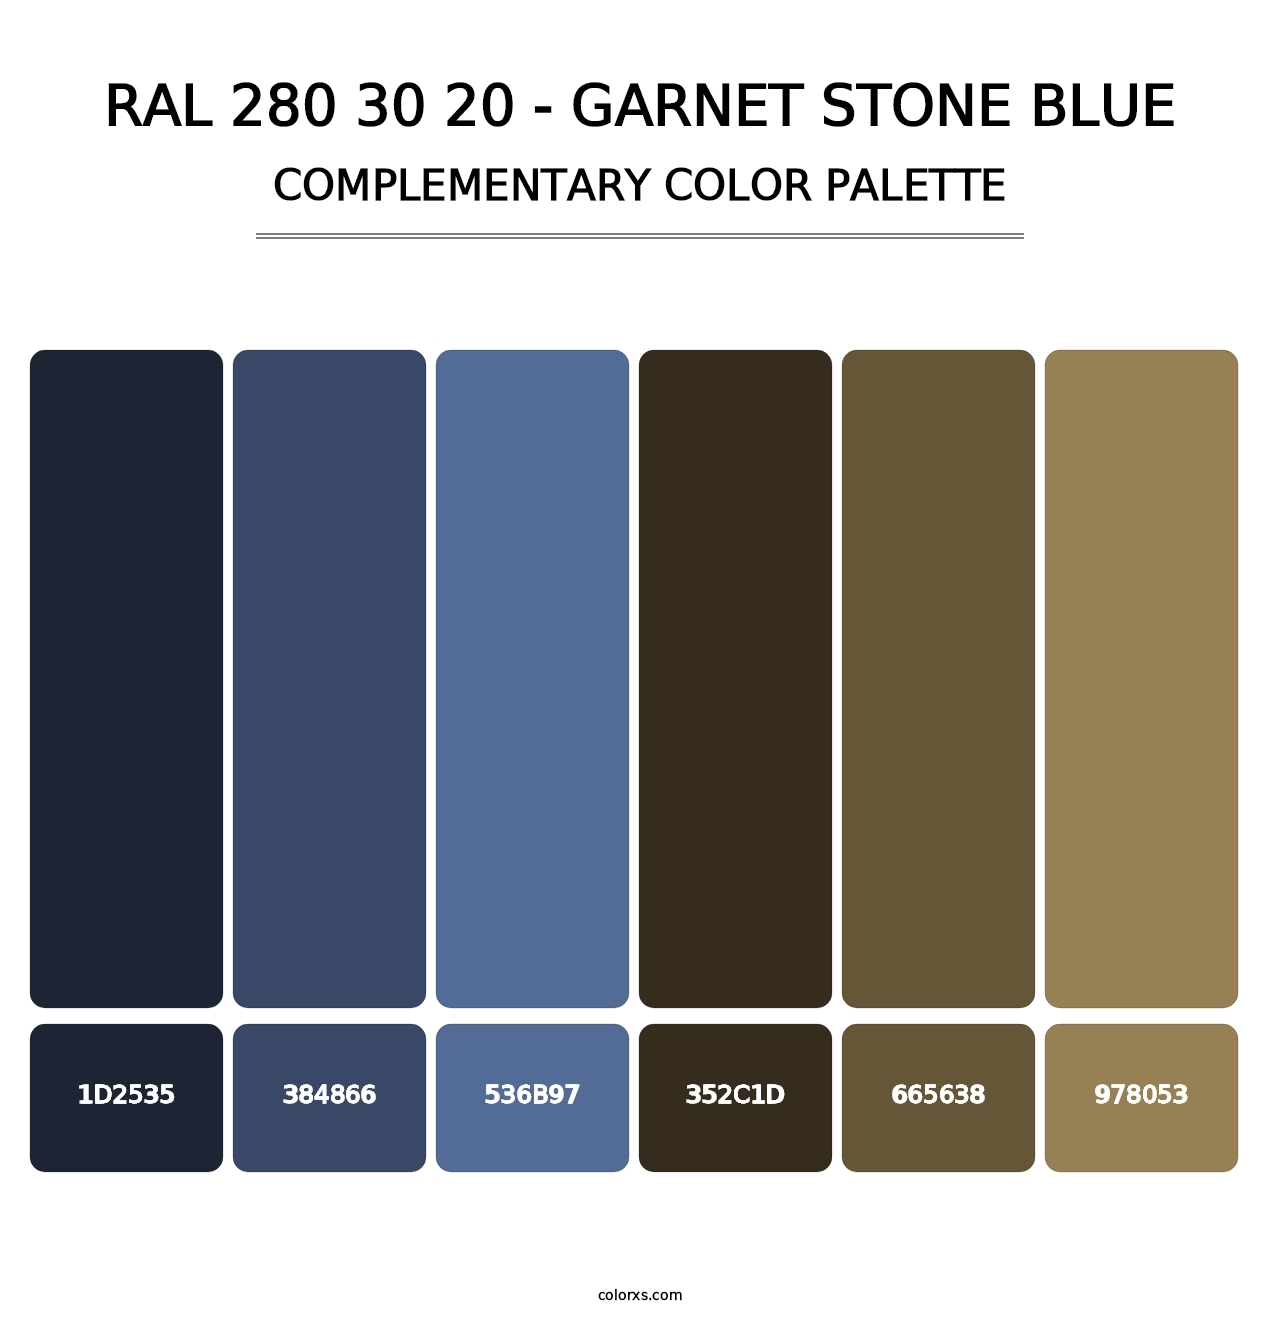 RAL 280 30 20 - Garnet Stone Blue - Complementary Color Palette